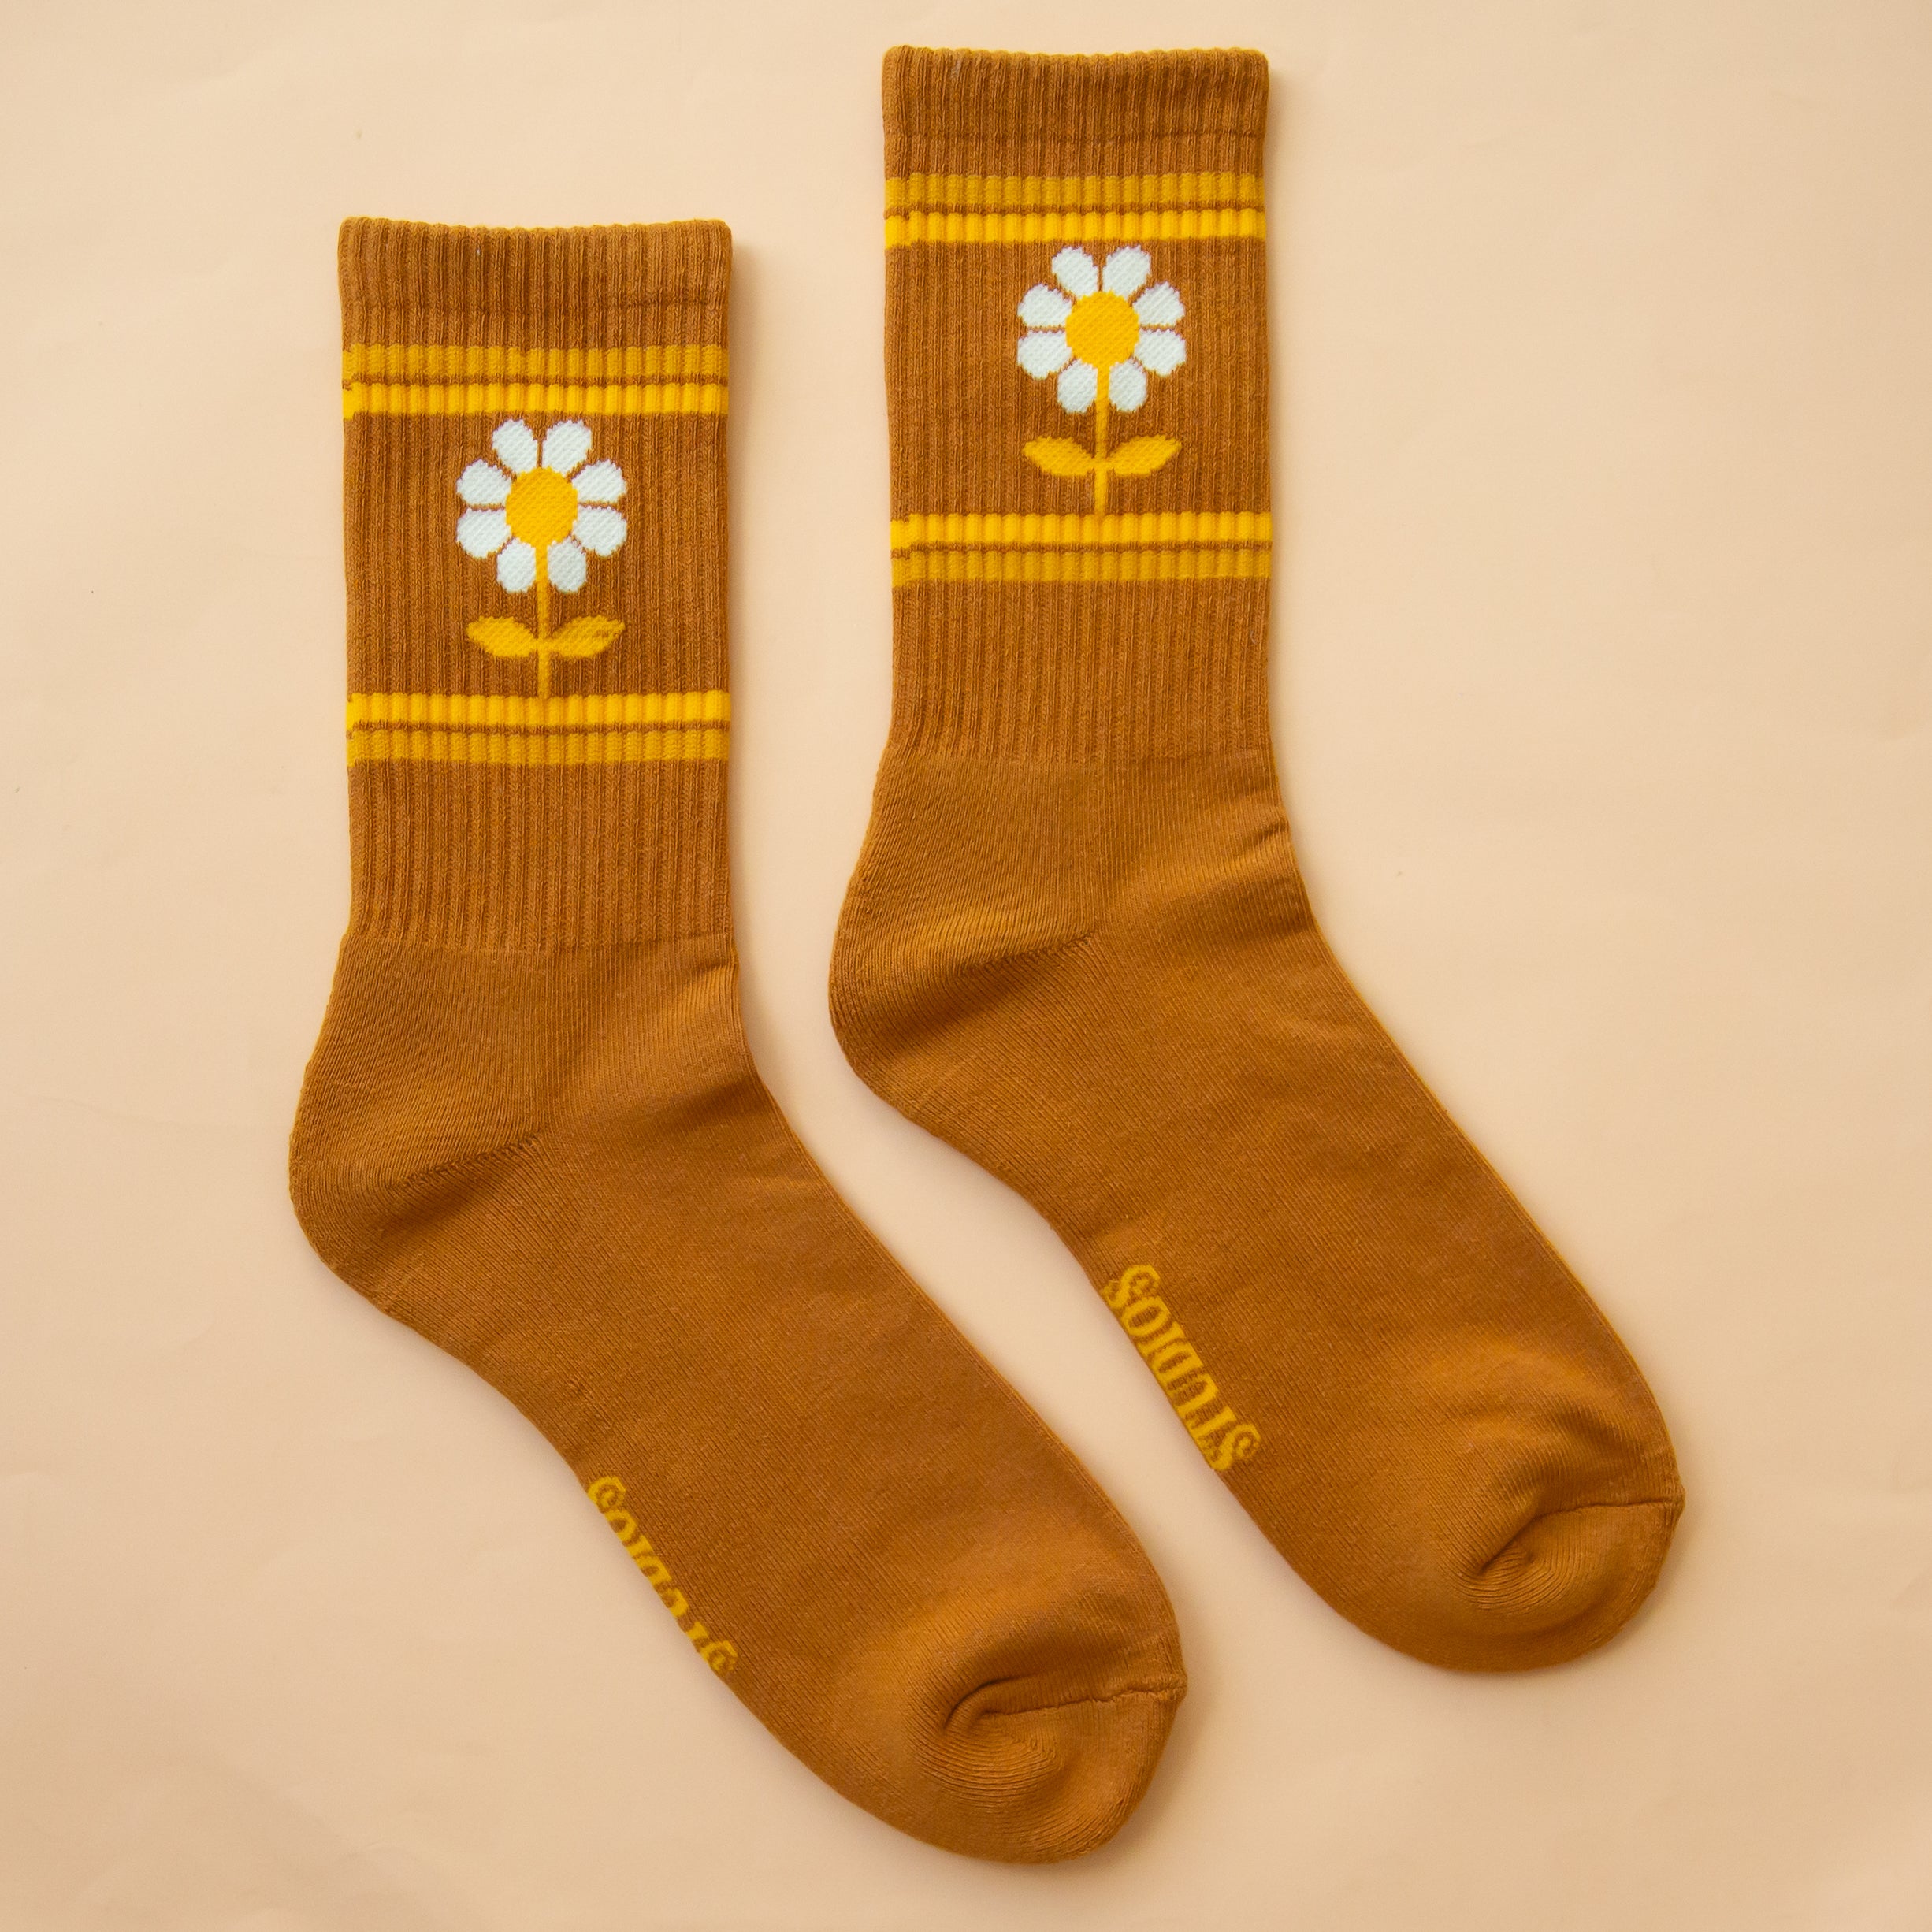 On a peachy background is a burnt orange pair of socks with a daisy graphic on the sides. 